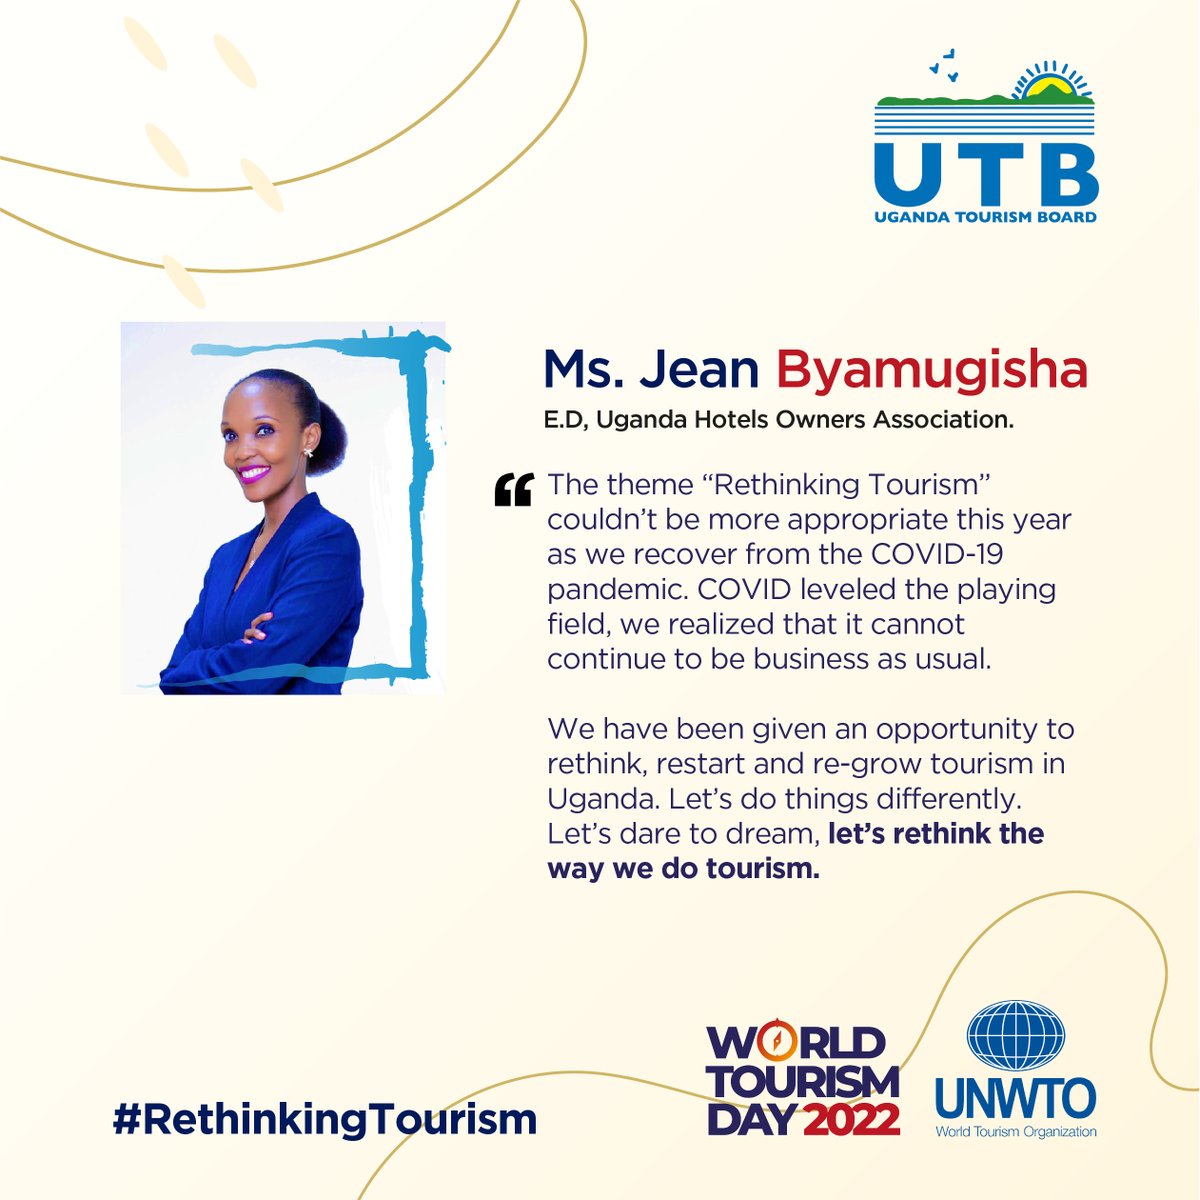 'We have been given an opportunity to rethink, restart and re-grow tourism in Uganda.' Here is Ms. Jean Byamugisha's message for #WorldTourismDay. 🇺🇬 #UniquelyOurs #ExploreUganda